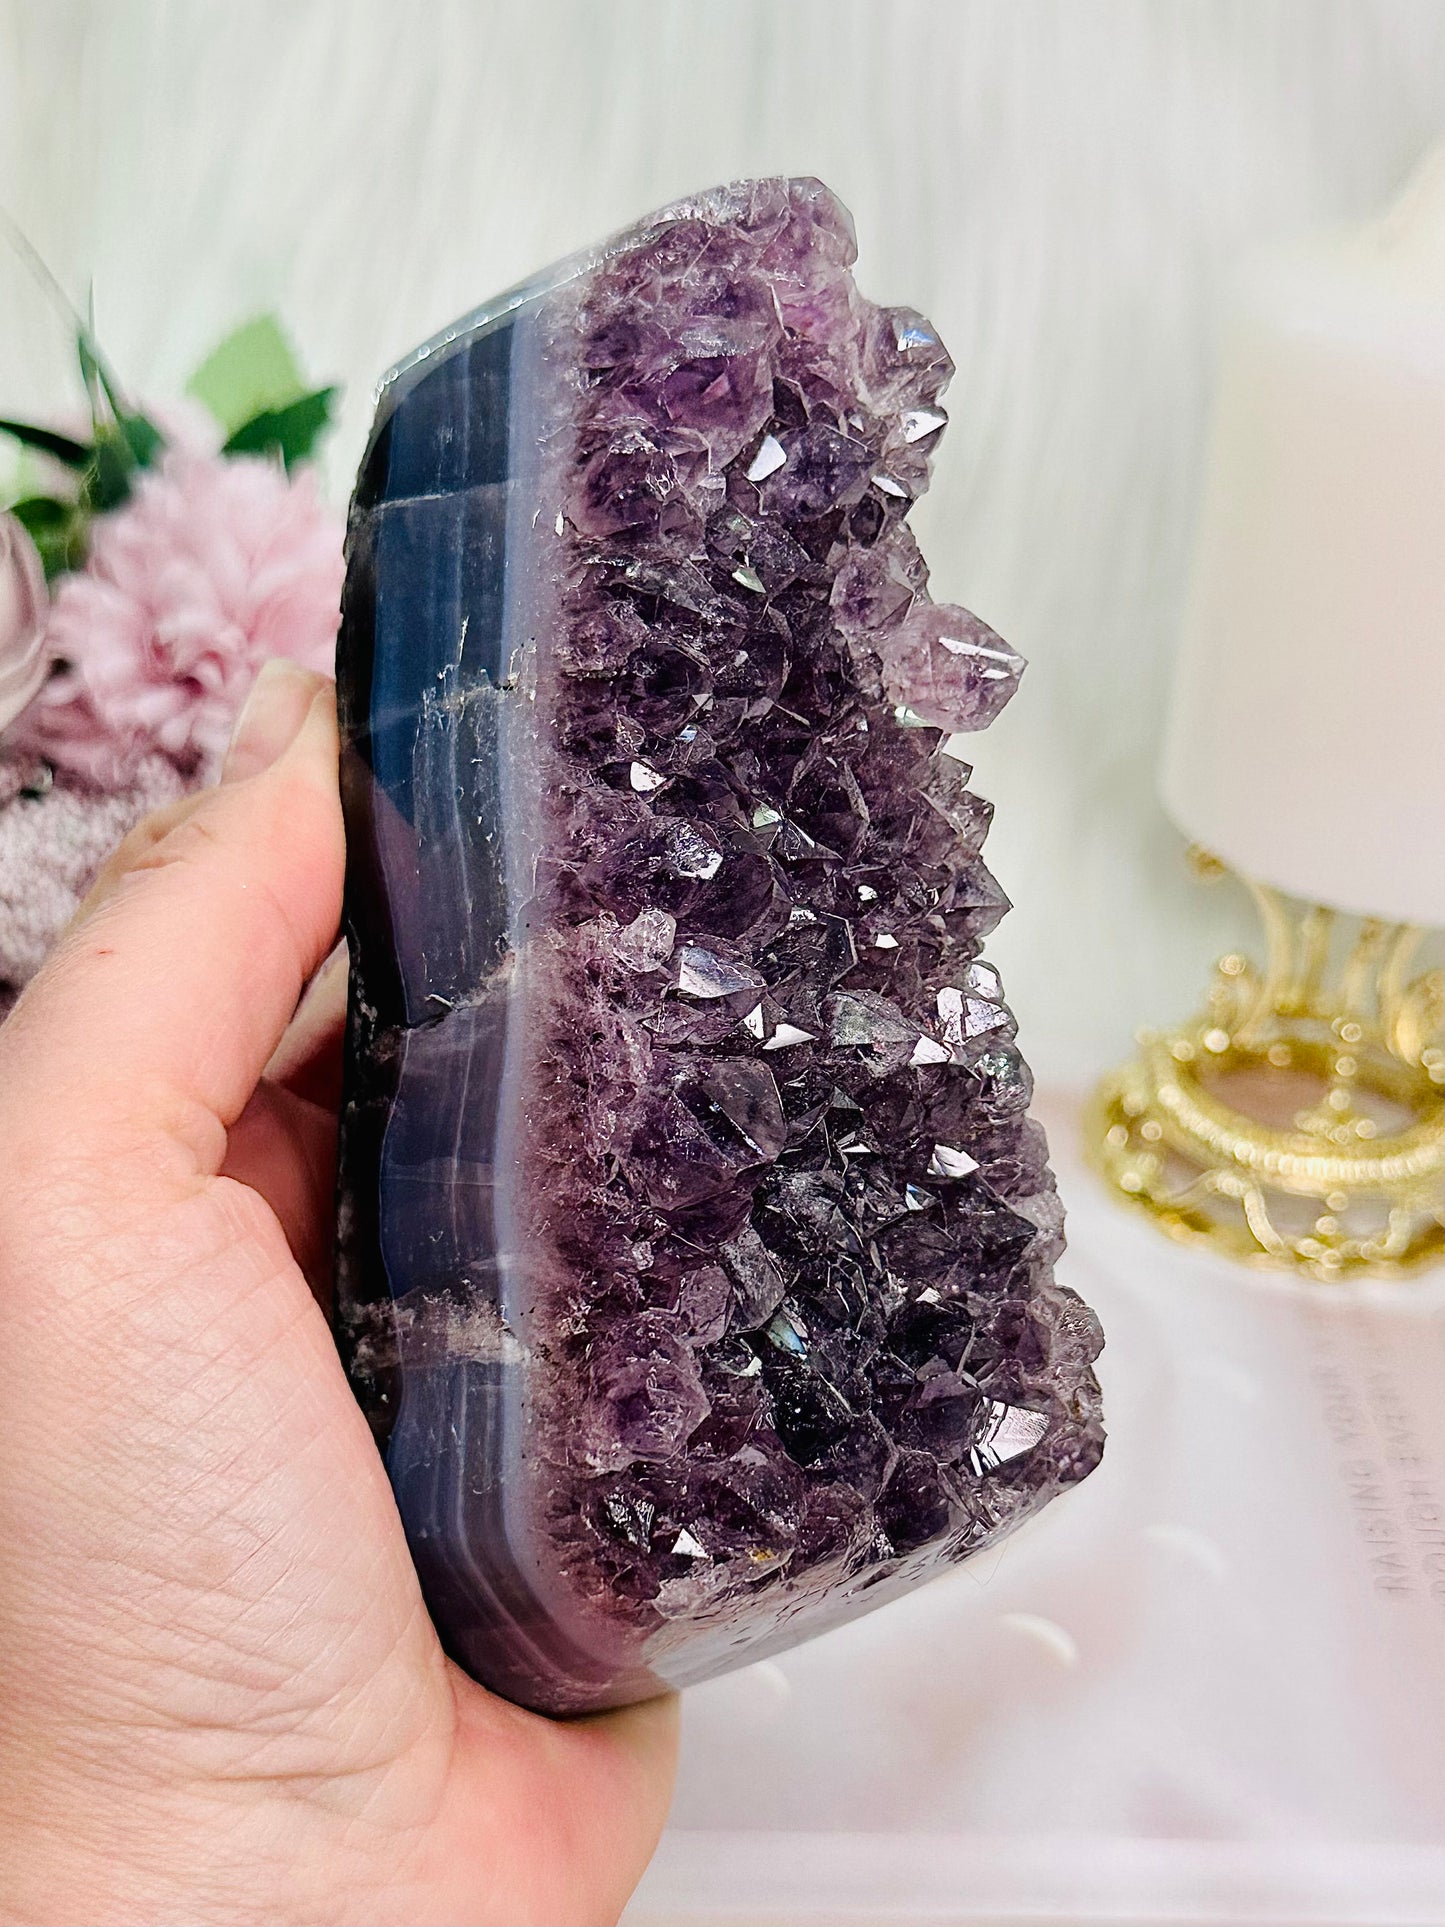 Simply Stunning Chunky 637gram Amethyst Agate Cluster From Brazil Just Gorgeous